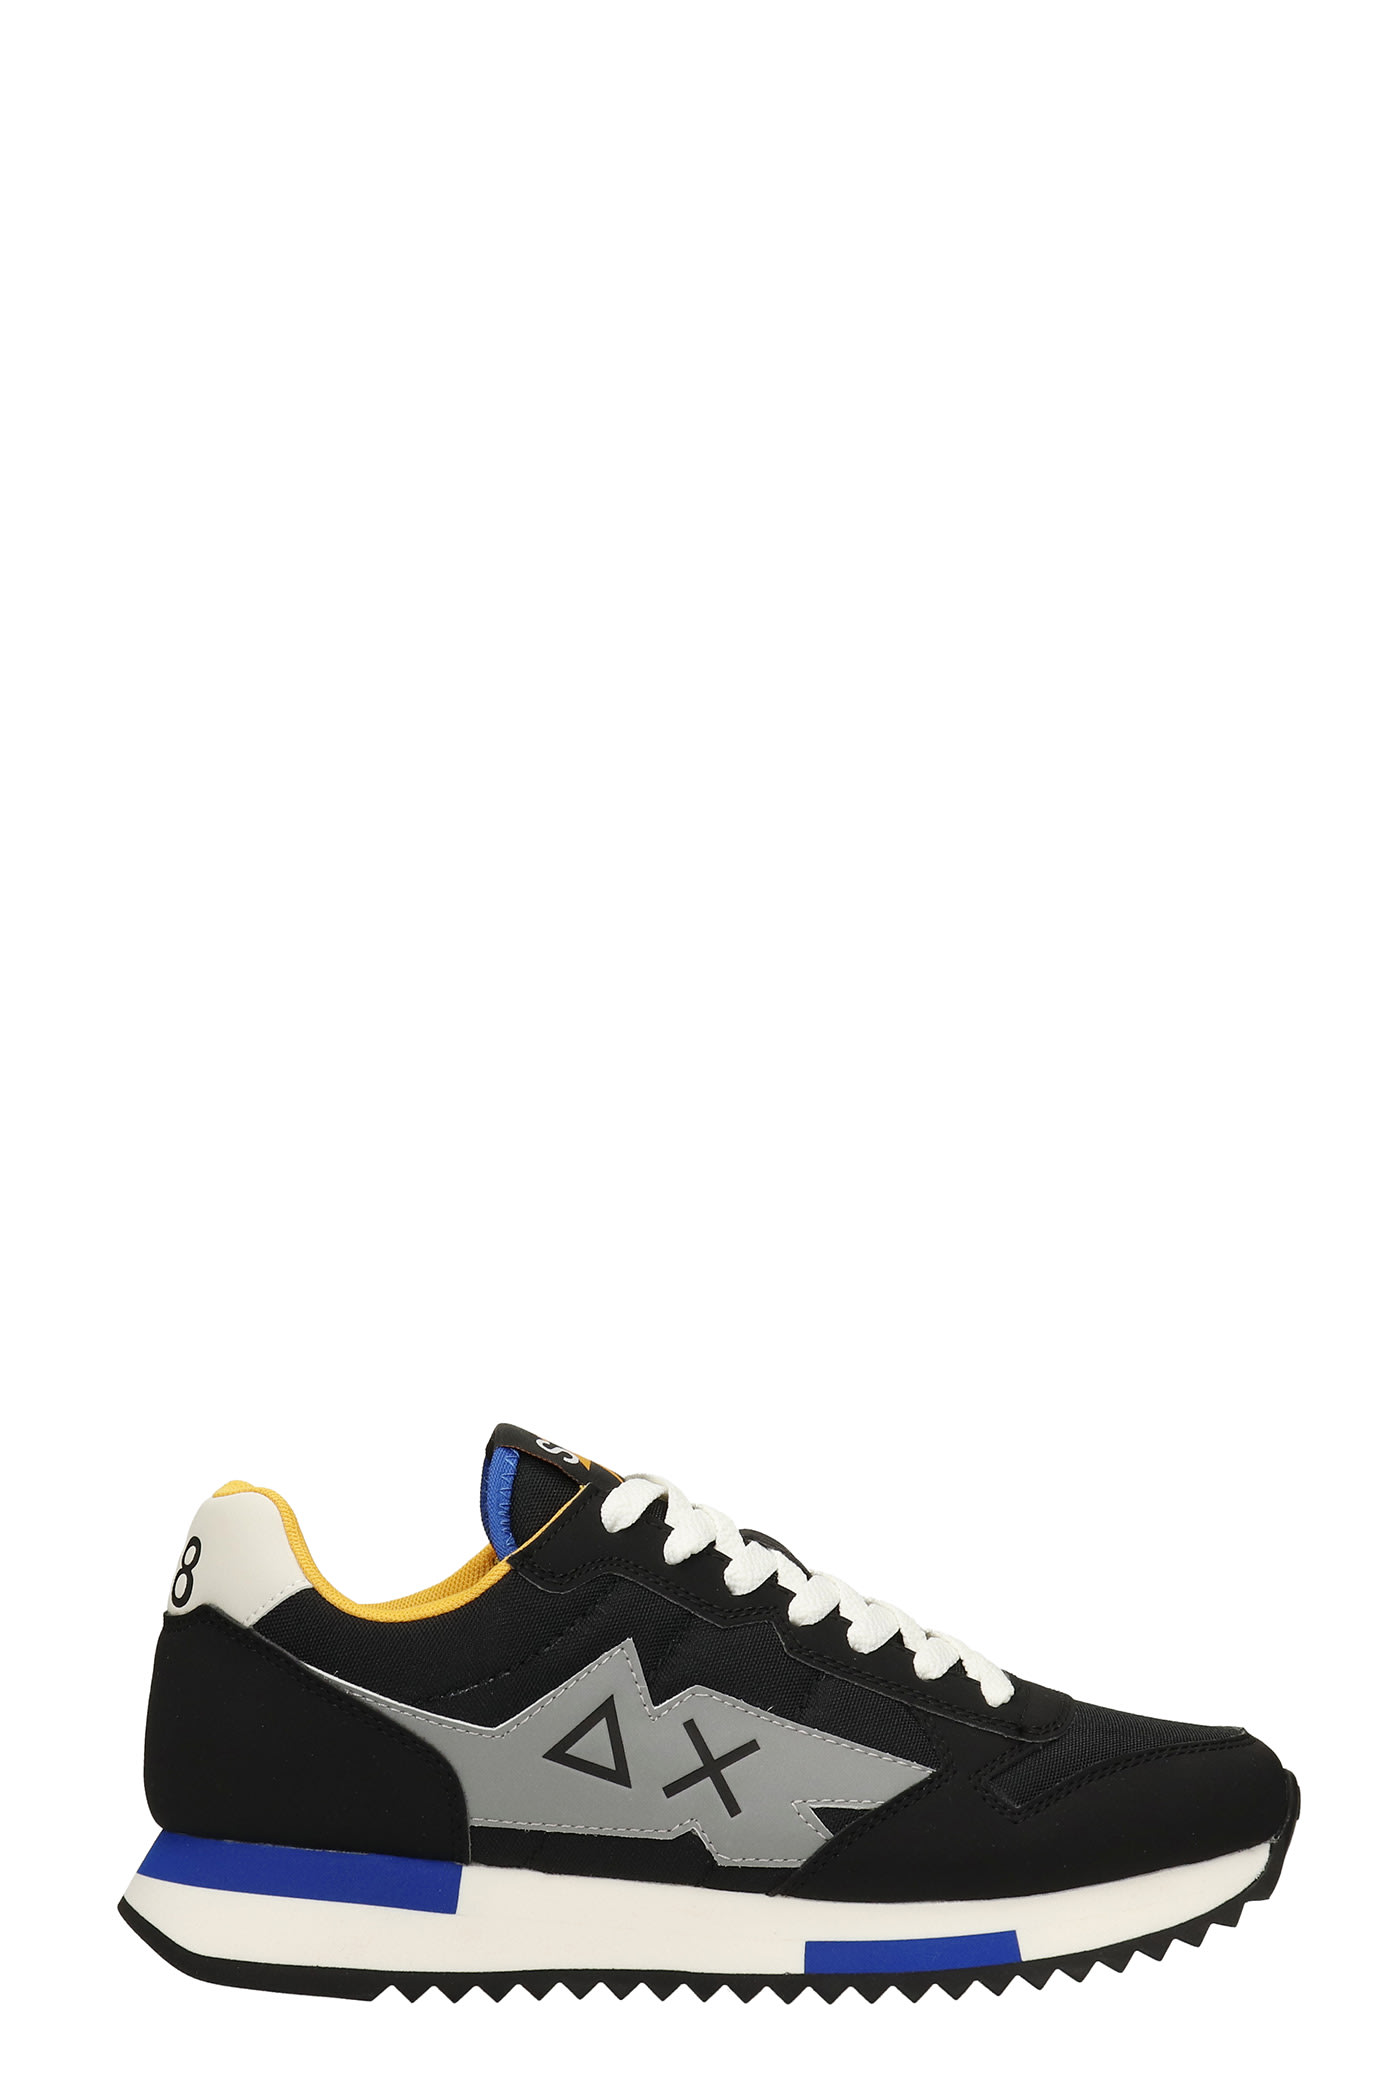 Sun 68 Niki Solid Sneakers In Black Leather And Fabric